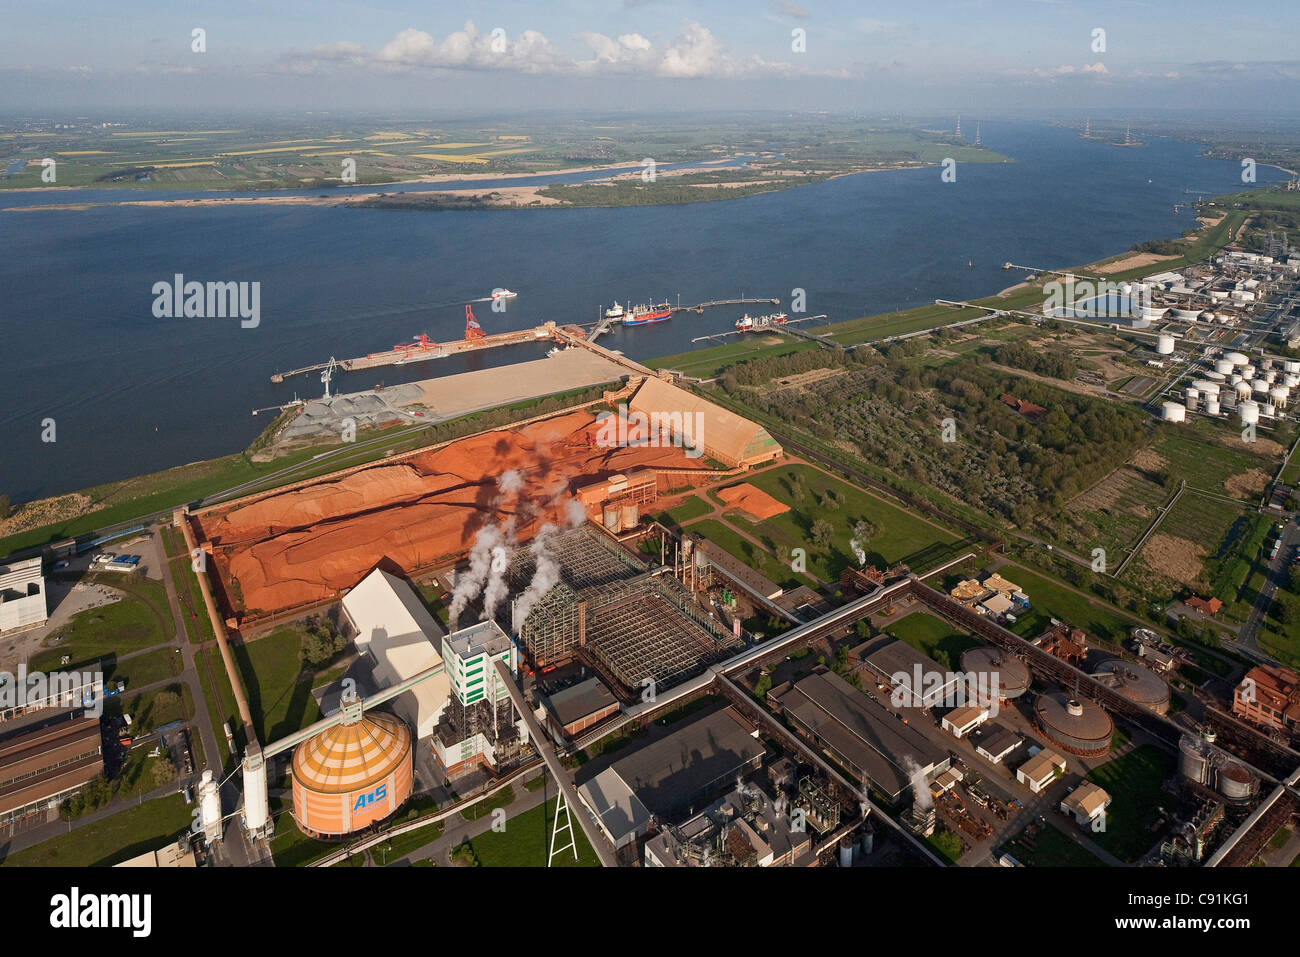 Aerial view of AOS bauxite loading wharf for aluminium production, site  near Stade, Lower Saxony, Germany Stock Photo - Alamy